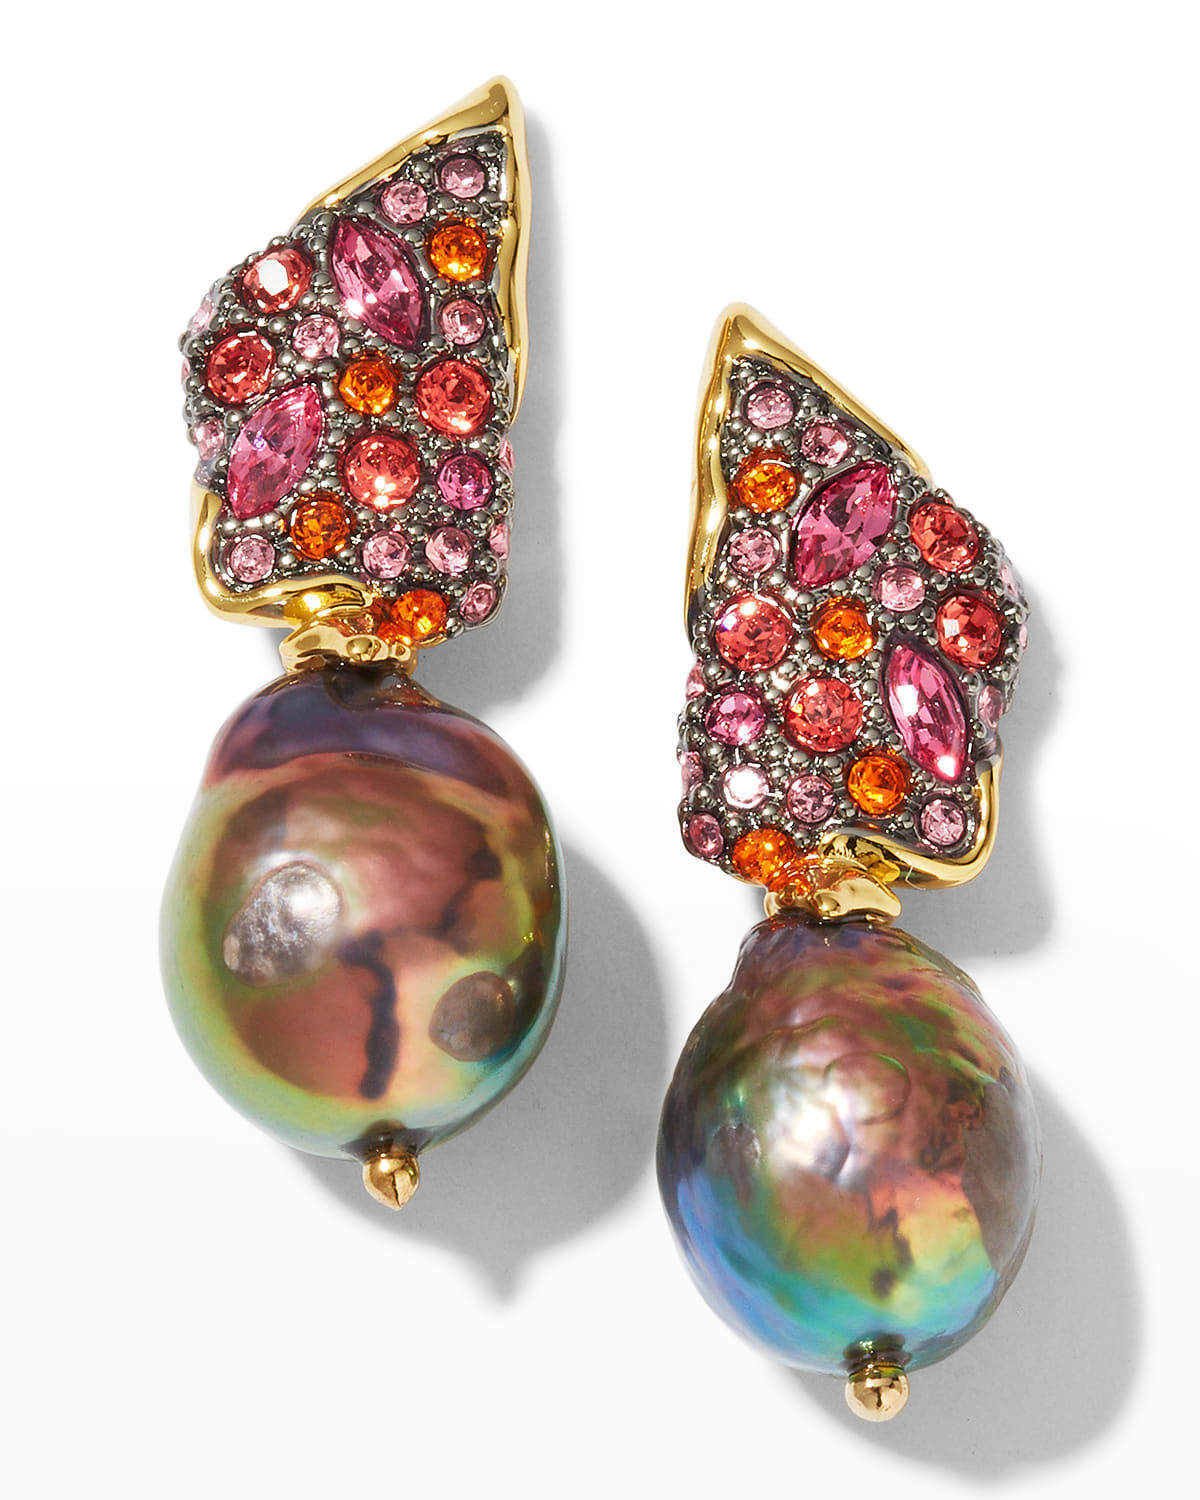 Alexis Bittar Solanales Crystal Angled Post Drop Earrings With Pearls In Stones